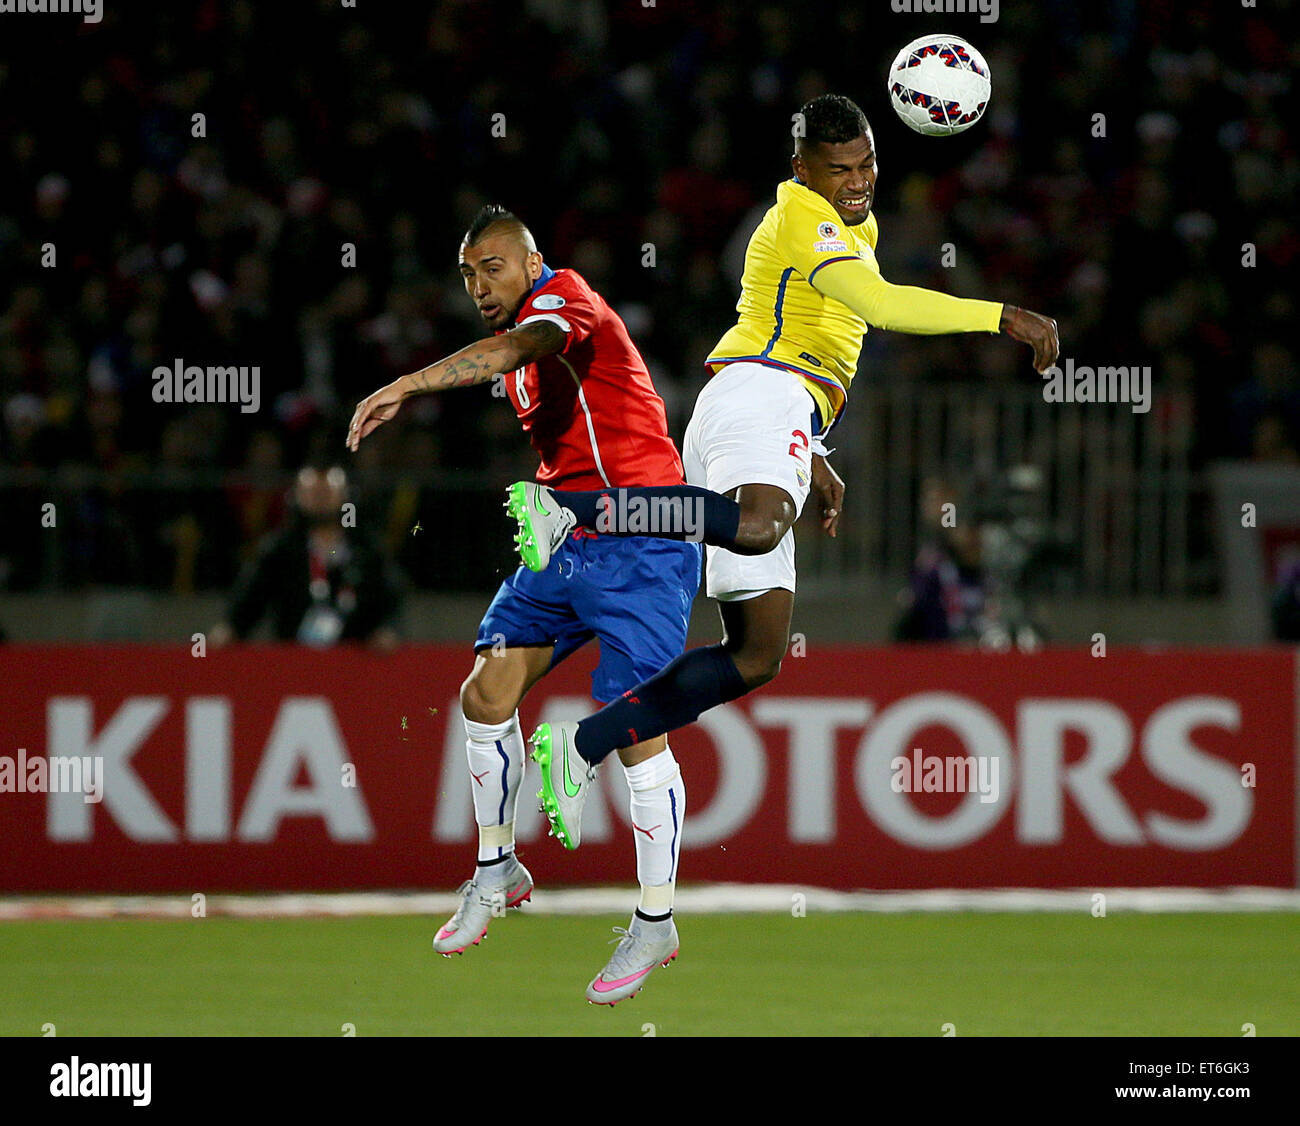 Santiago, Chile. 11th June, 2015. Arturo Vidal (L) of Chile vies for the ball with Gabriel Achilier (R) from Ecuador during the opening match of the Copa America 2015, in Santiago, capital of Chile, on June 11, 2015. Chile won 1-0. Credit:  TELAM/Xinhua/Alamy Live News Stock Photo